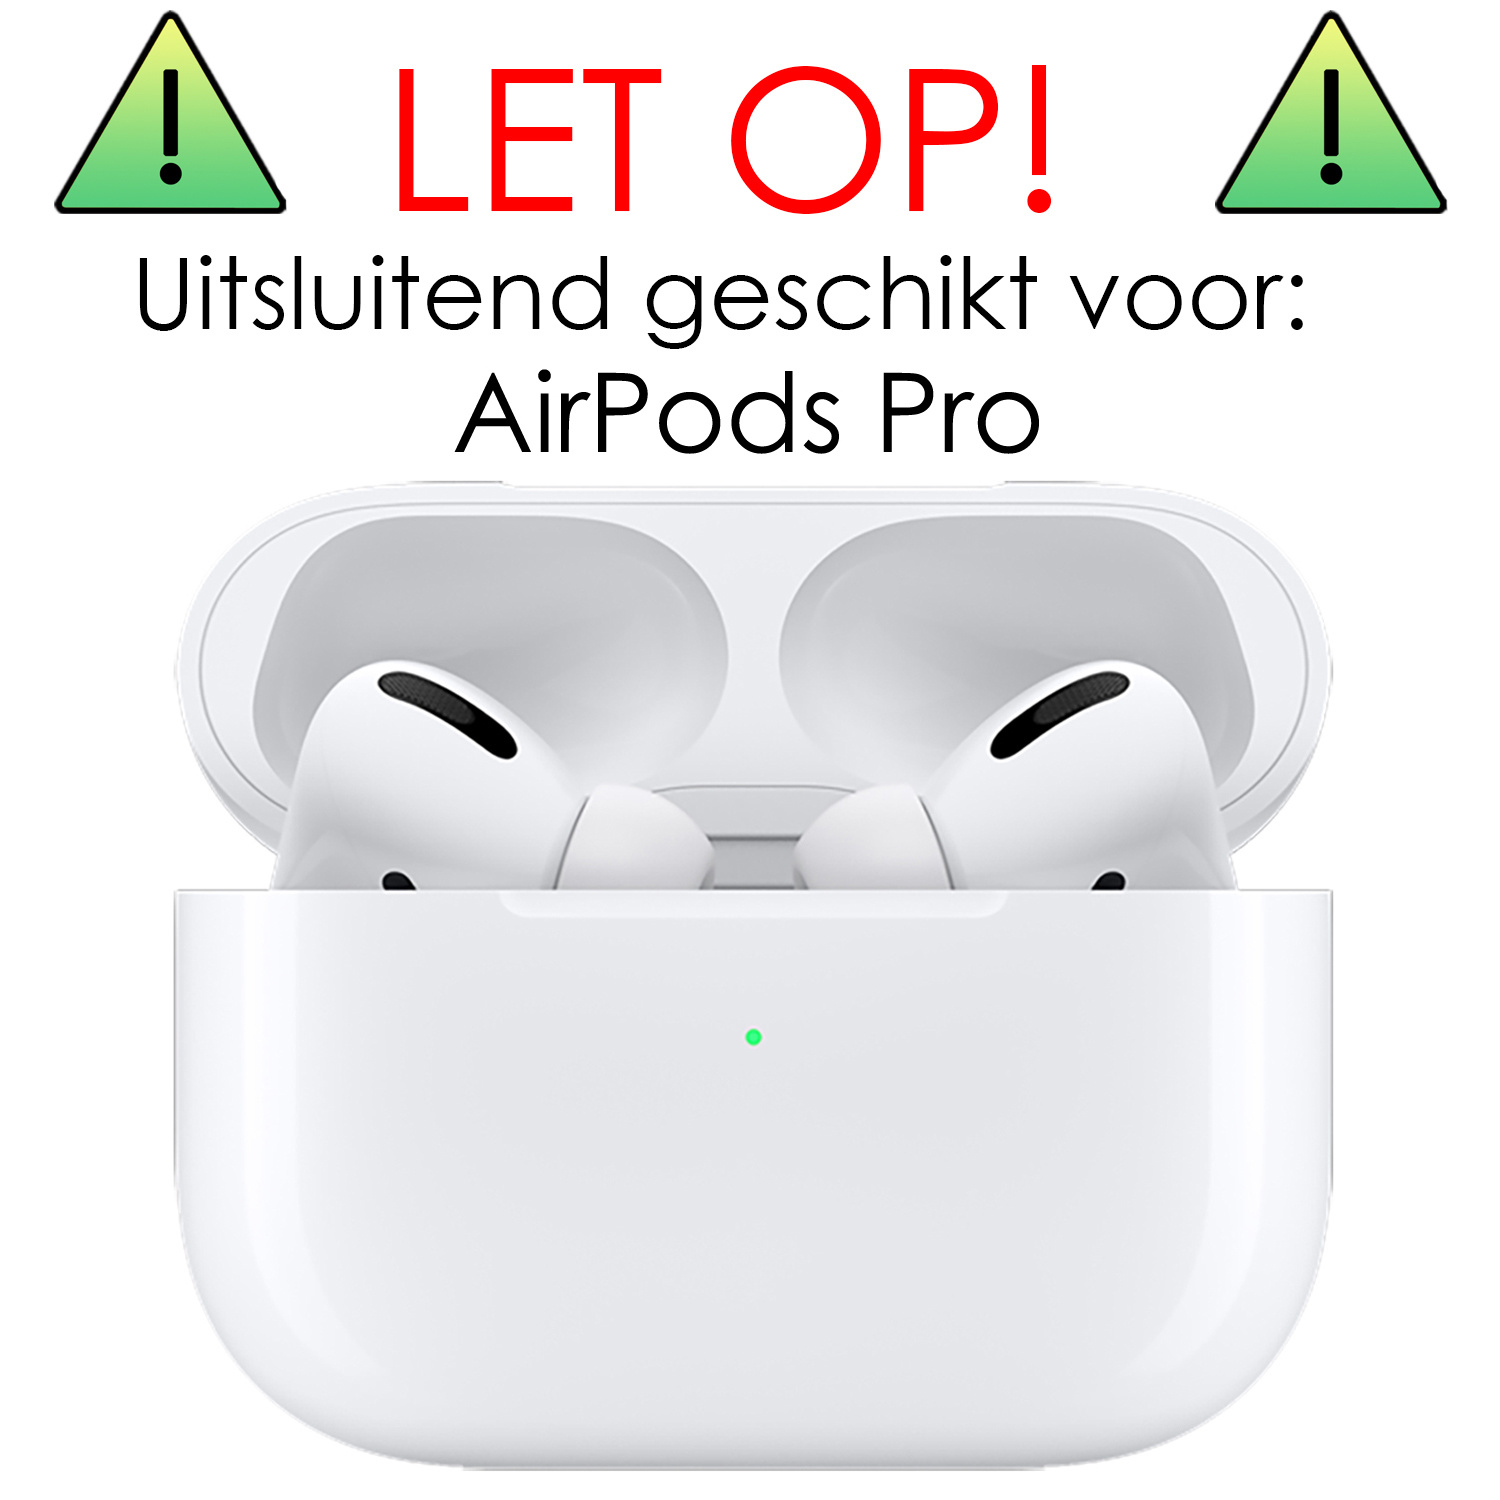 NoXx Hoes Geschikt voor Airpods Pro Hoesje Cover Silicone Case Hoes - Donkerblauw - 2x